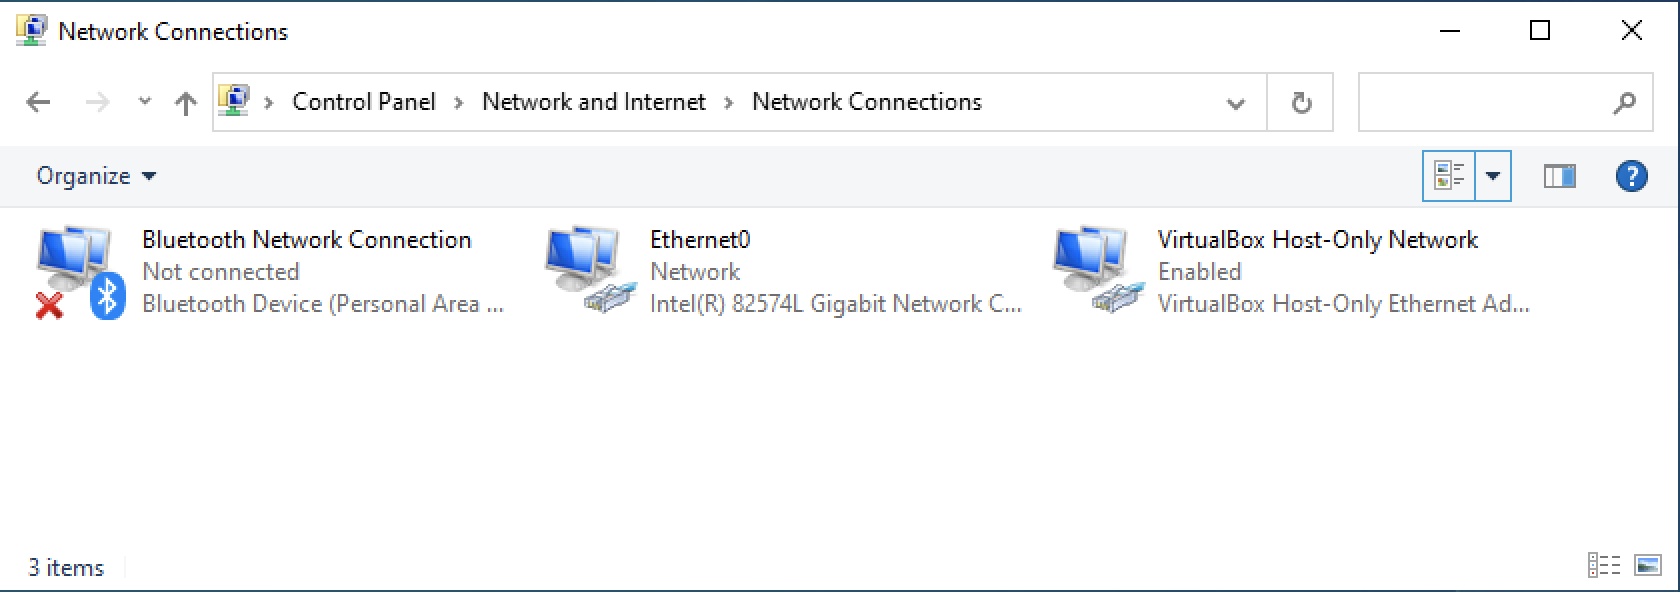 A screen shot that shows the network connections available a virtualbox only network is now available